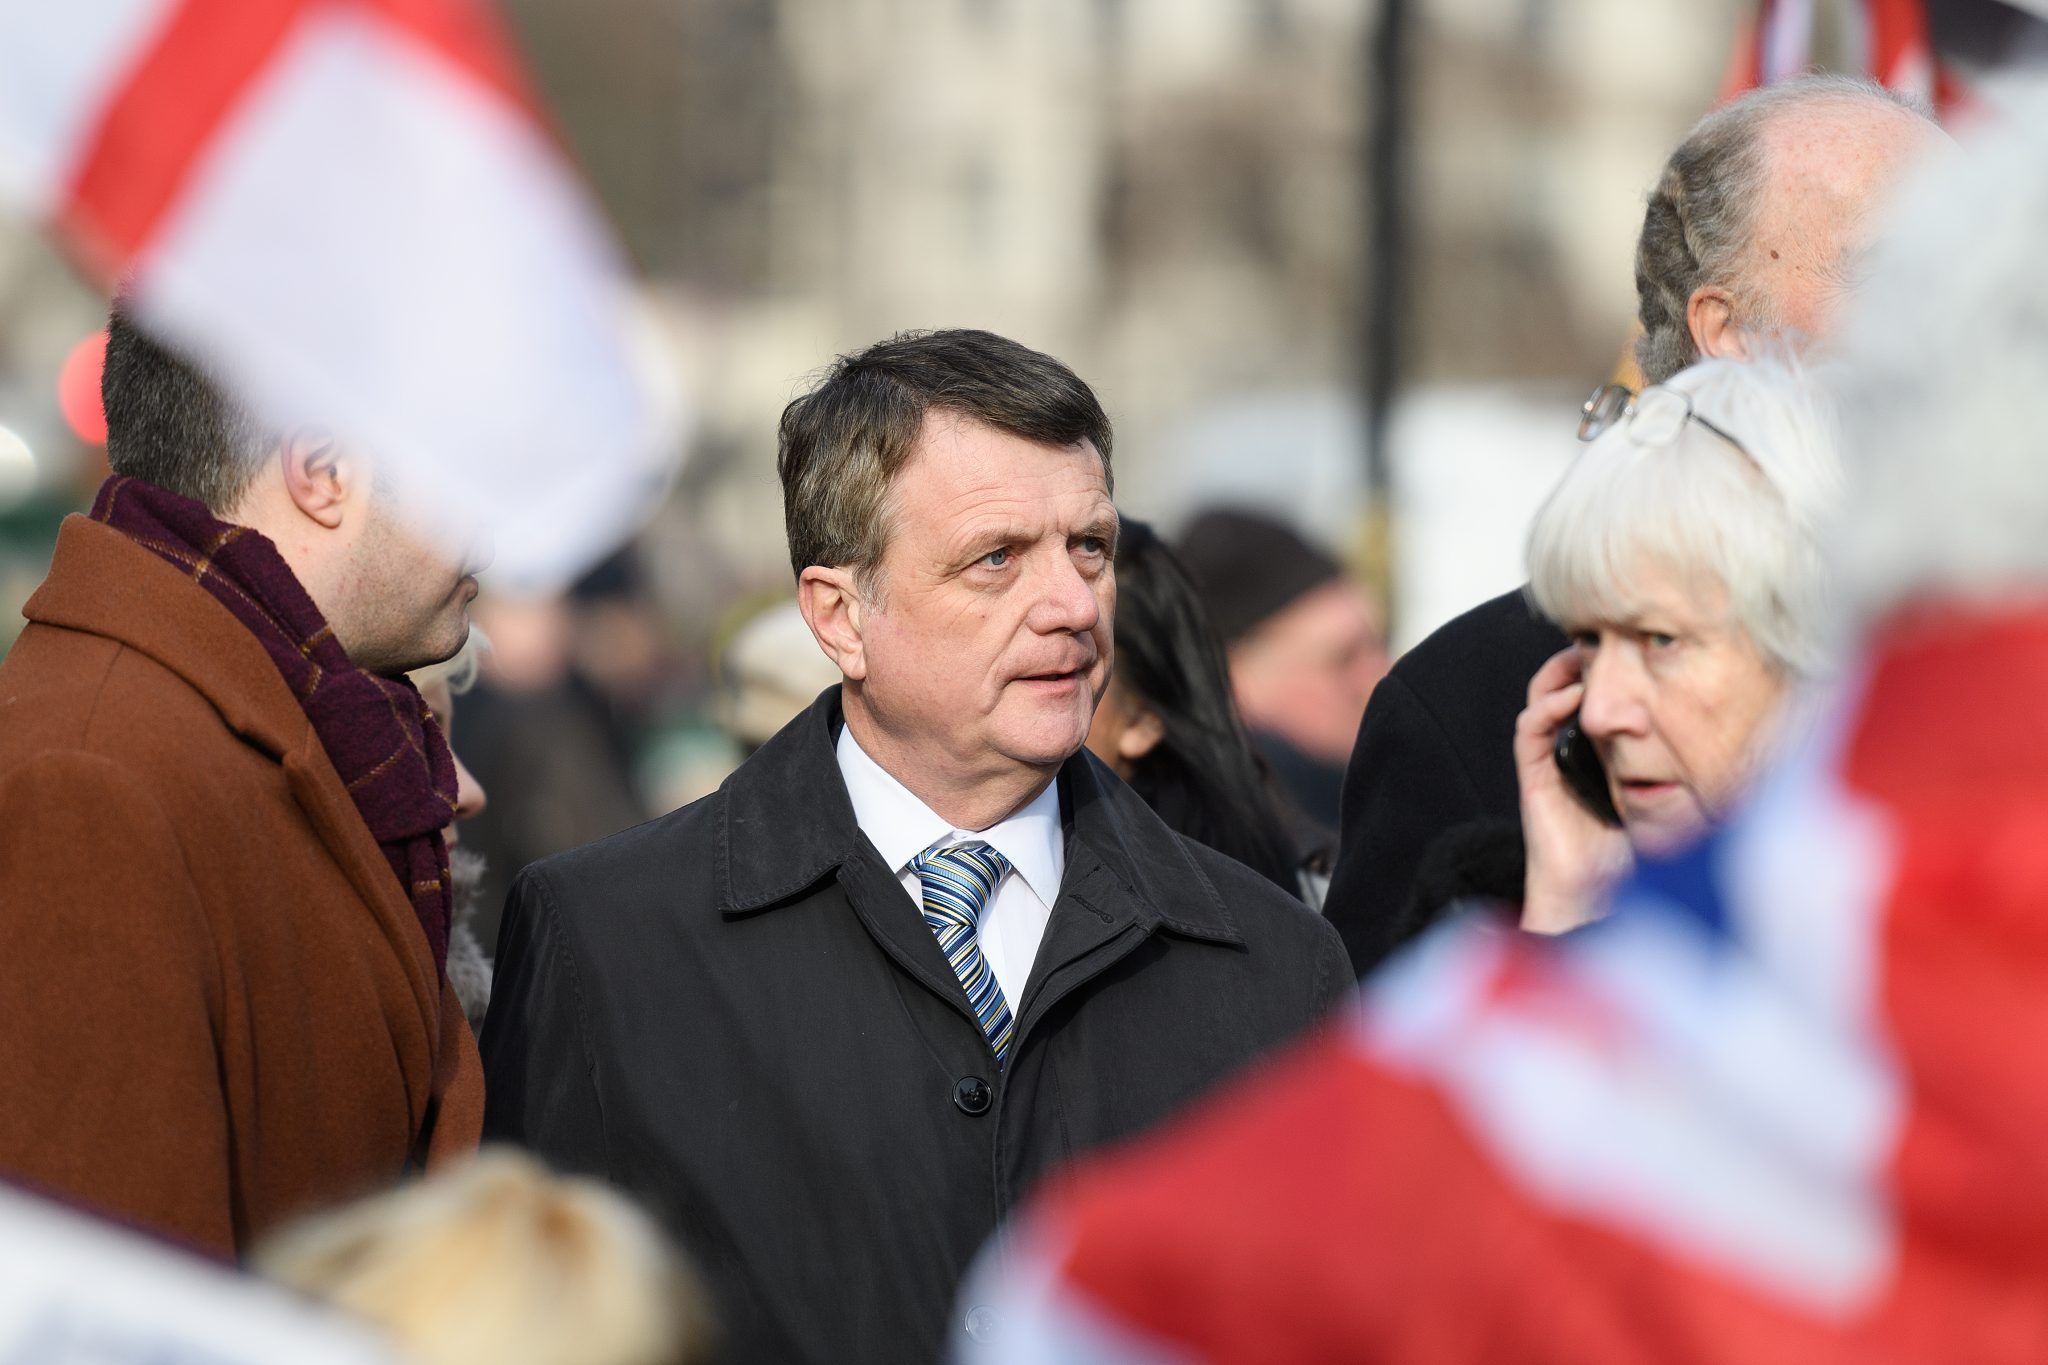 Gerard Batten has accused prime minister Theresa May of betraying the Brexit vote (Credit: Leon Neal)